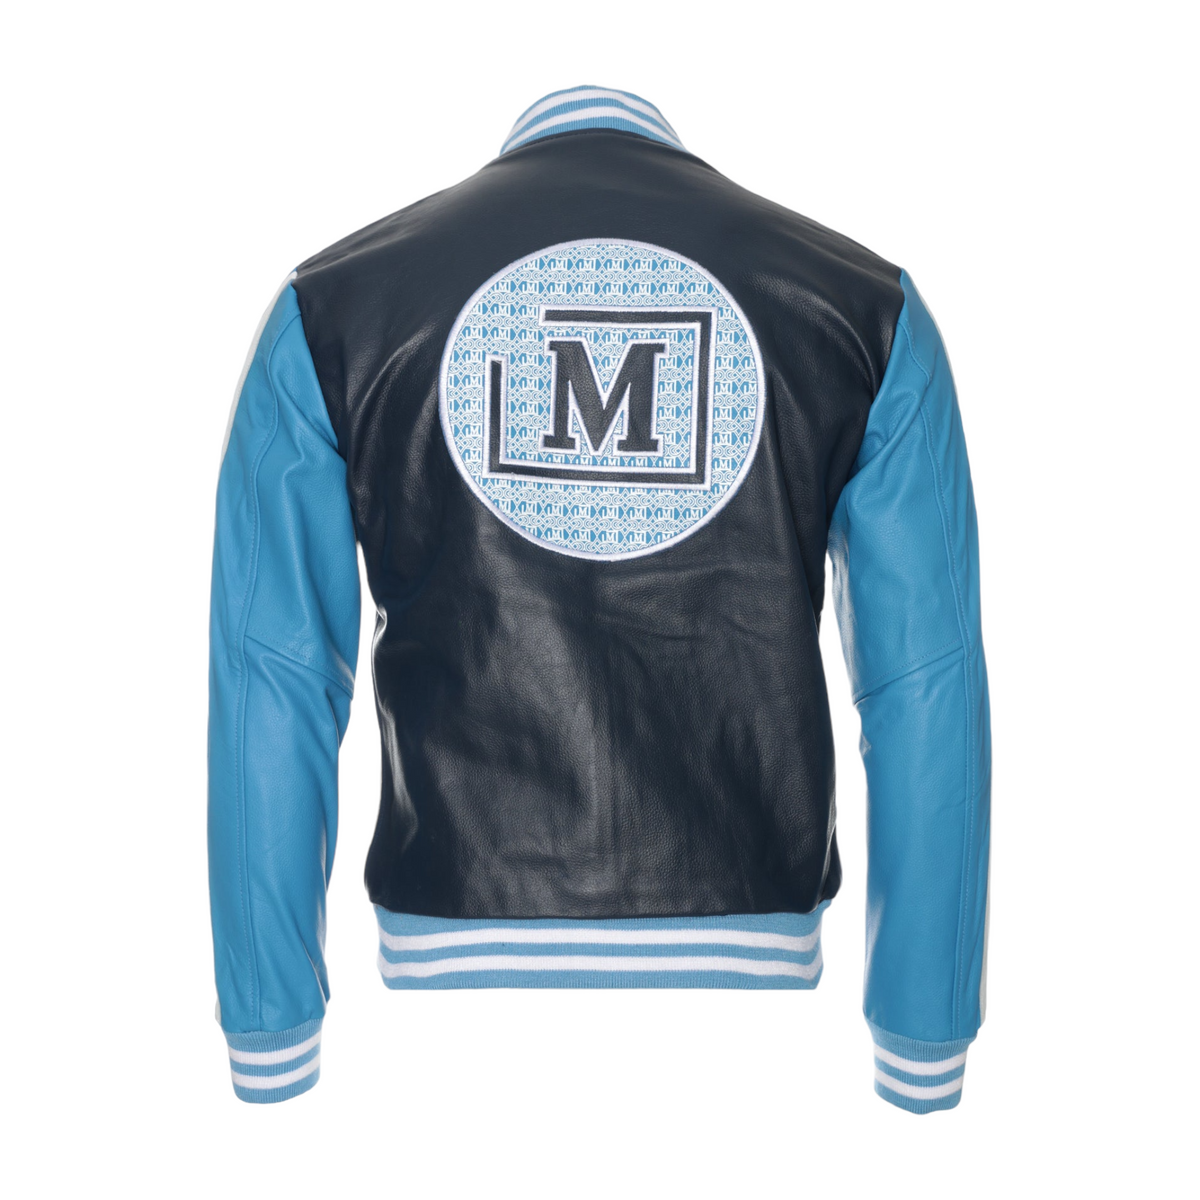 MDB Brand Men's Leather All over Print Patch Jacket